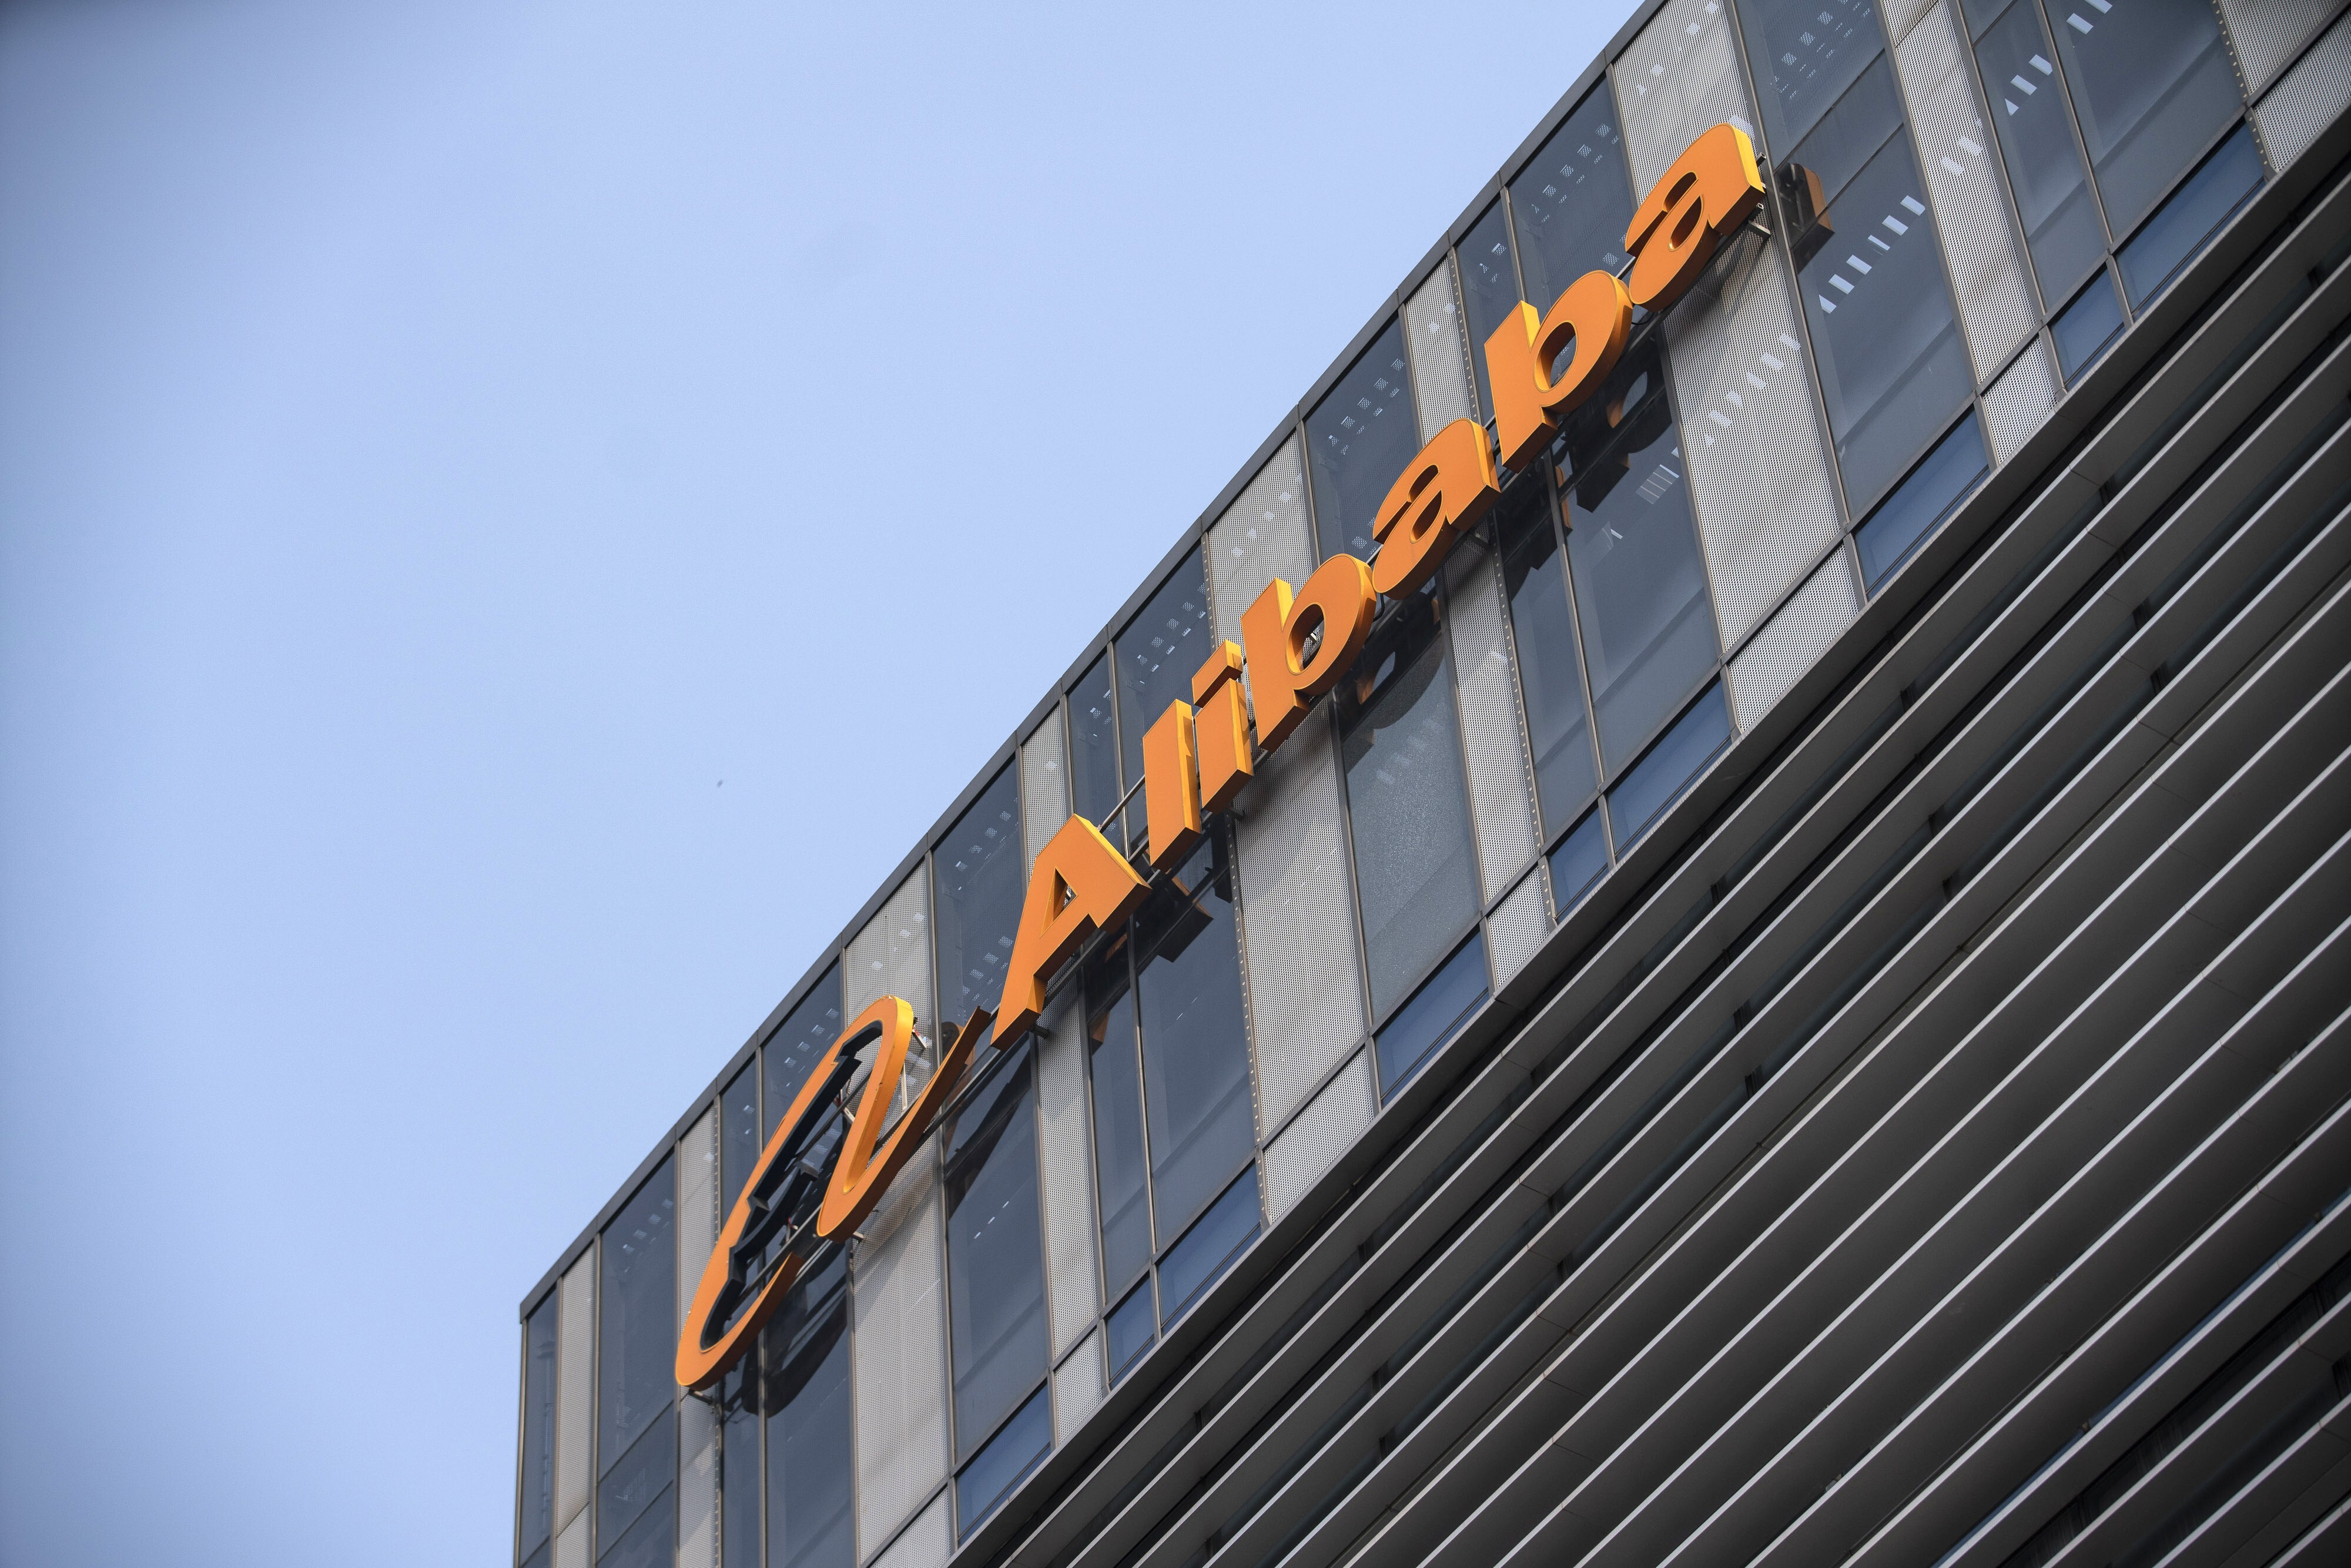 The State Administration of Market Regulation has officially started investigating Alibaba Group Holding over suspected monopolistic practices. Photo: Bloomberg